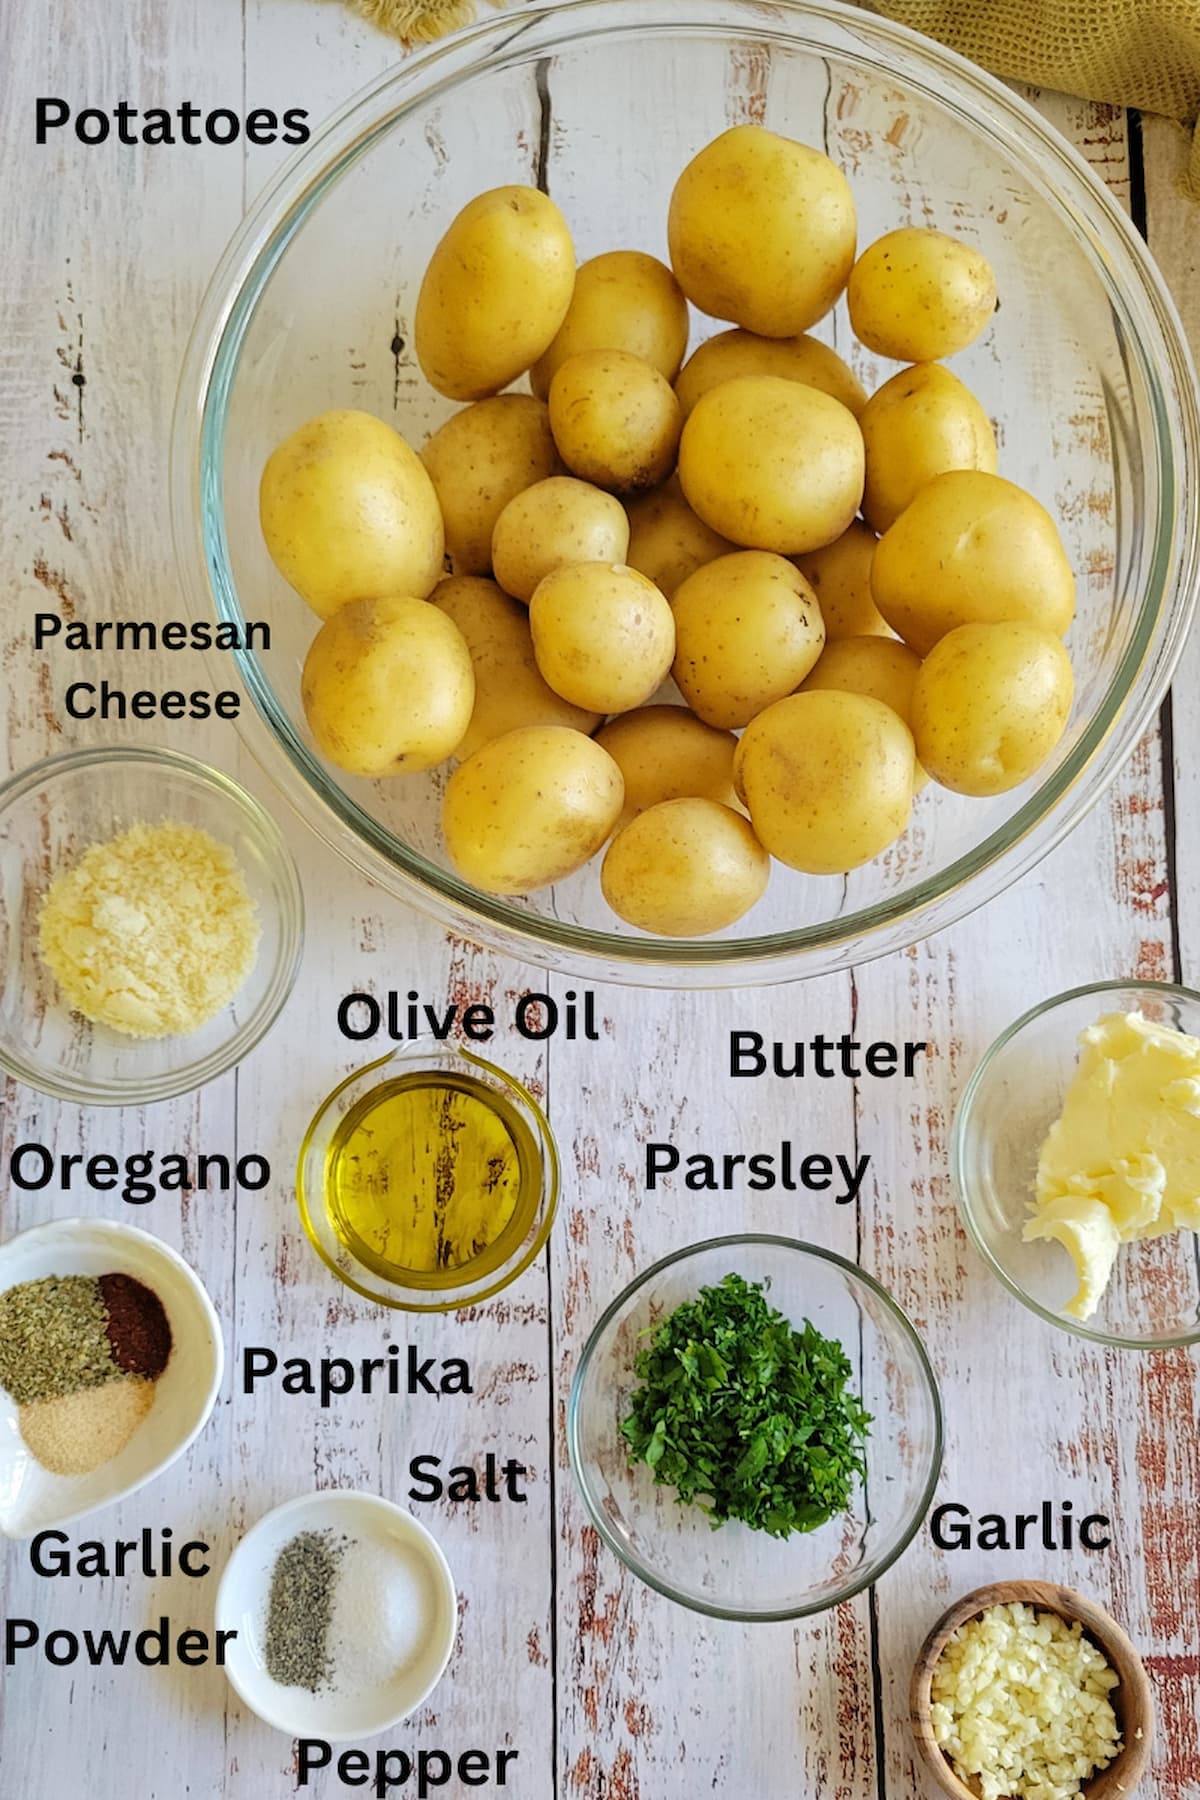 ingredients for smash potatoes in oven - potatoes, olive oil, butter, parsley, garlic, salt, pepper, paprika, garlic powder, parmesan cheese